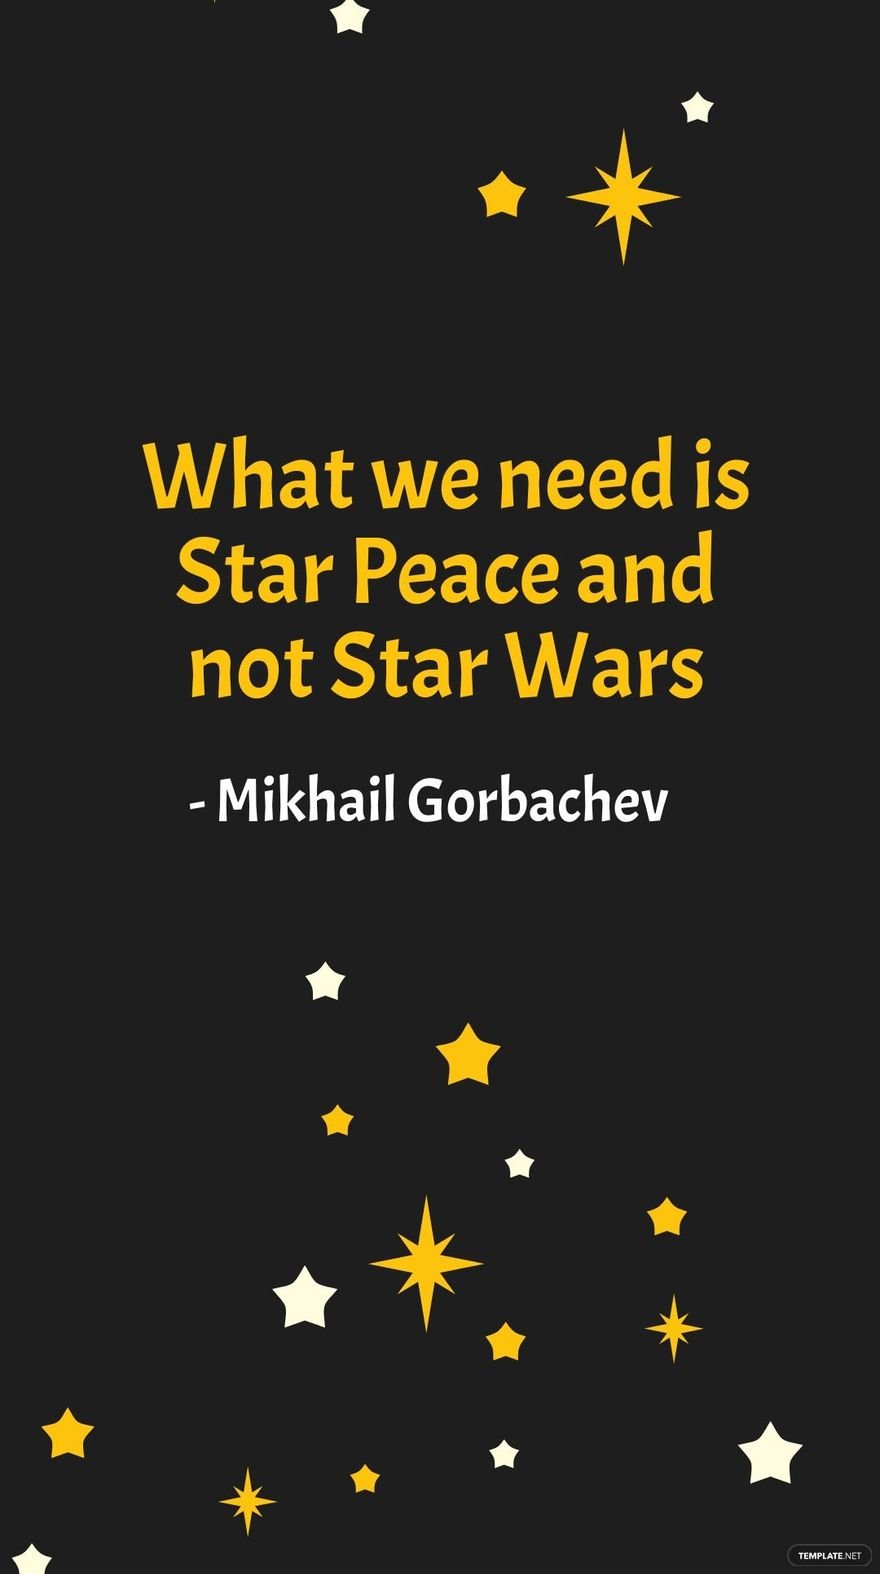 Mikhail Gorbachev - What we need is Star Peace and not Star Wars in JPG